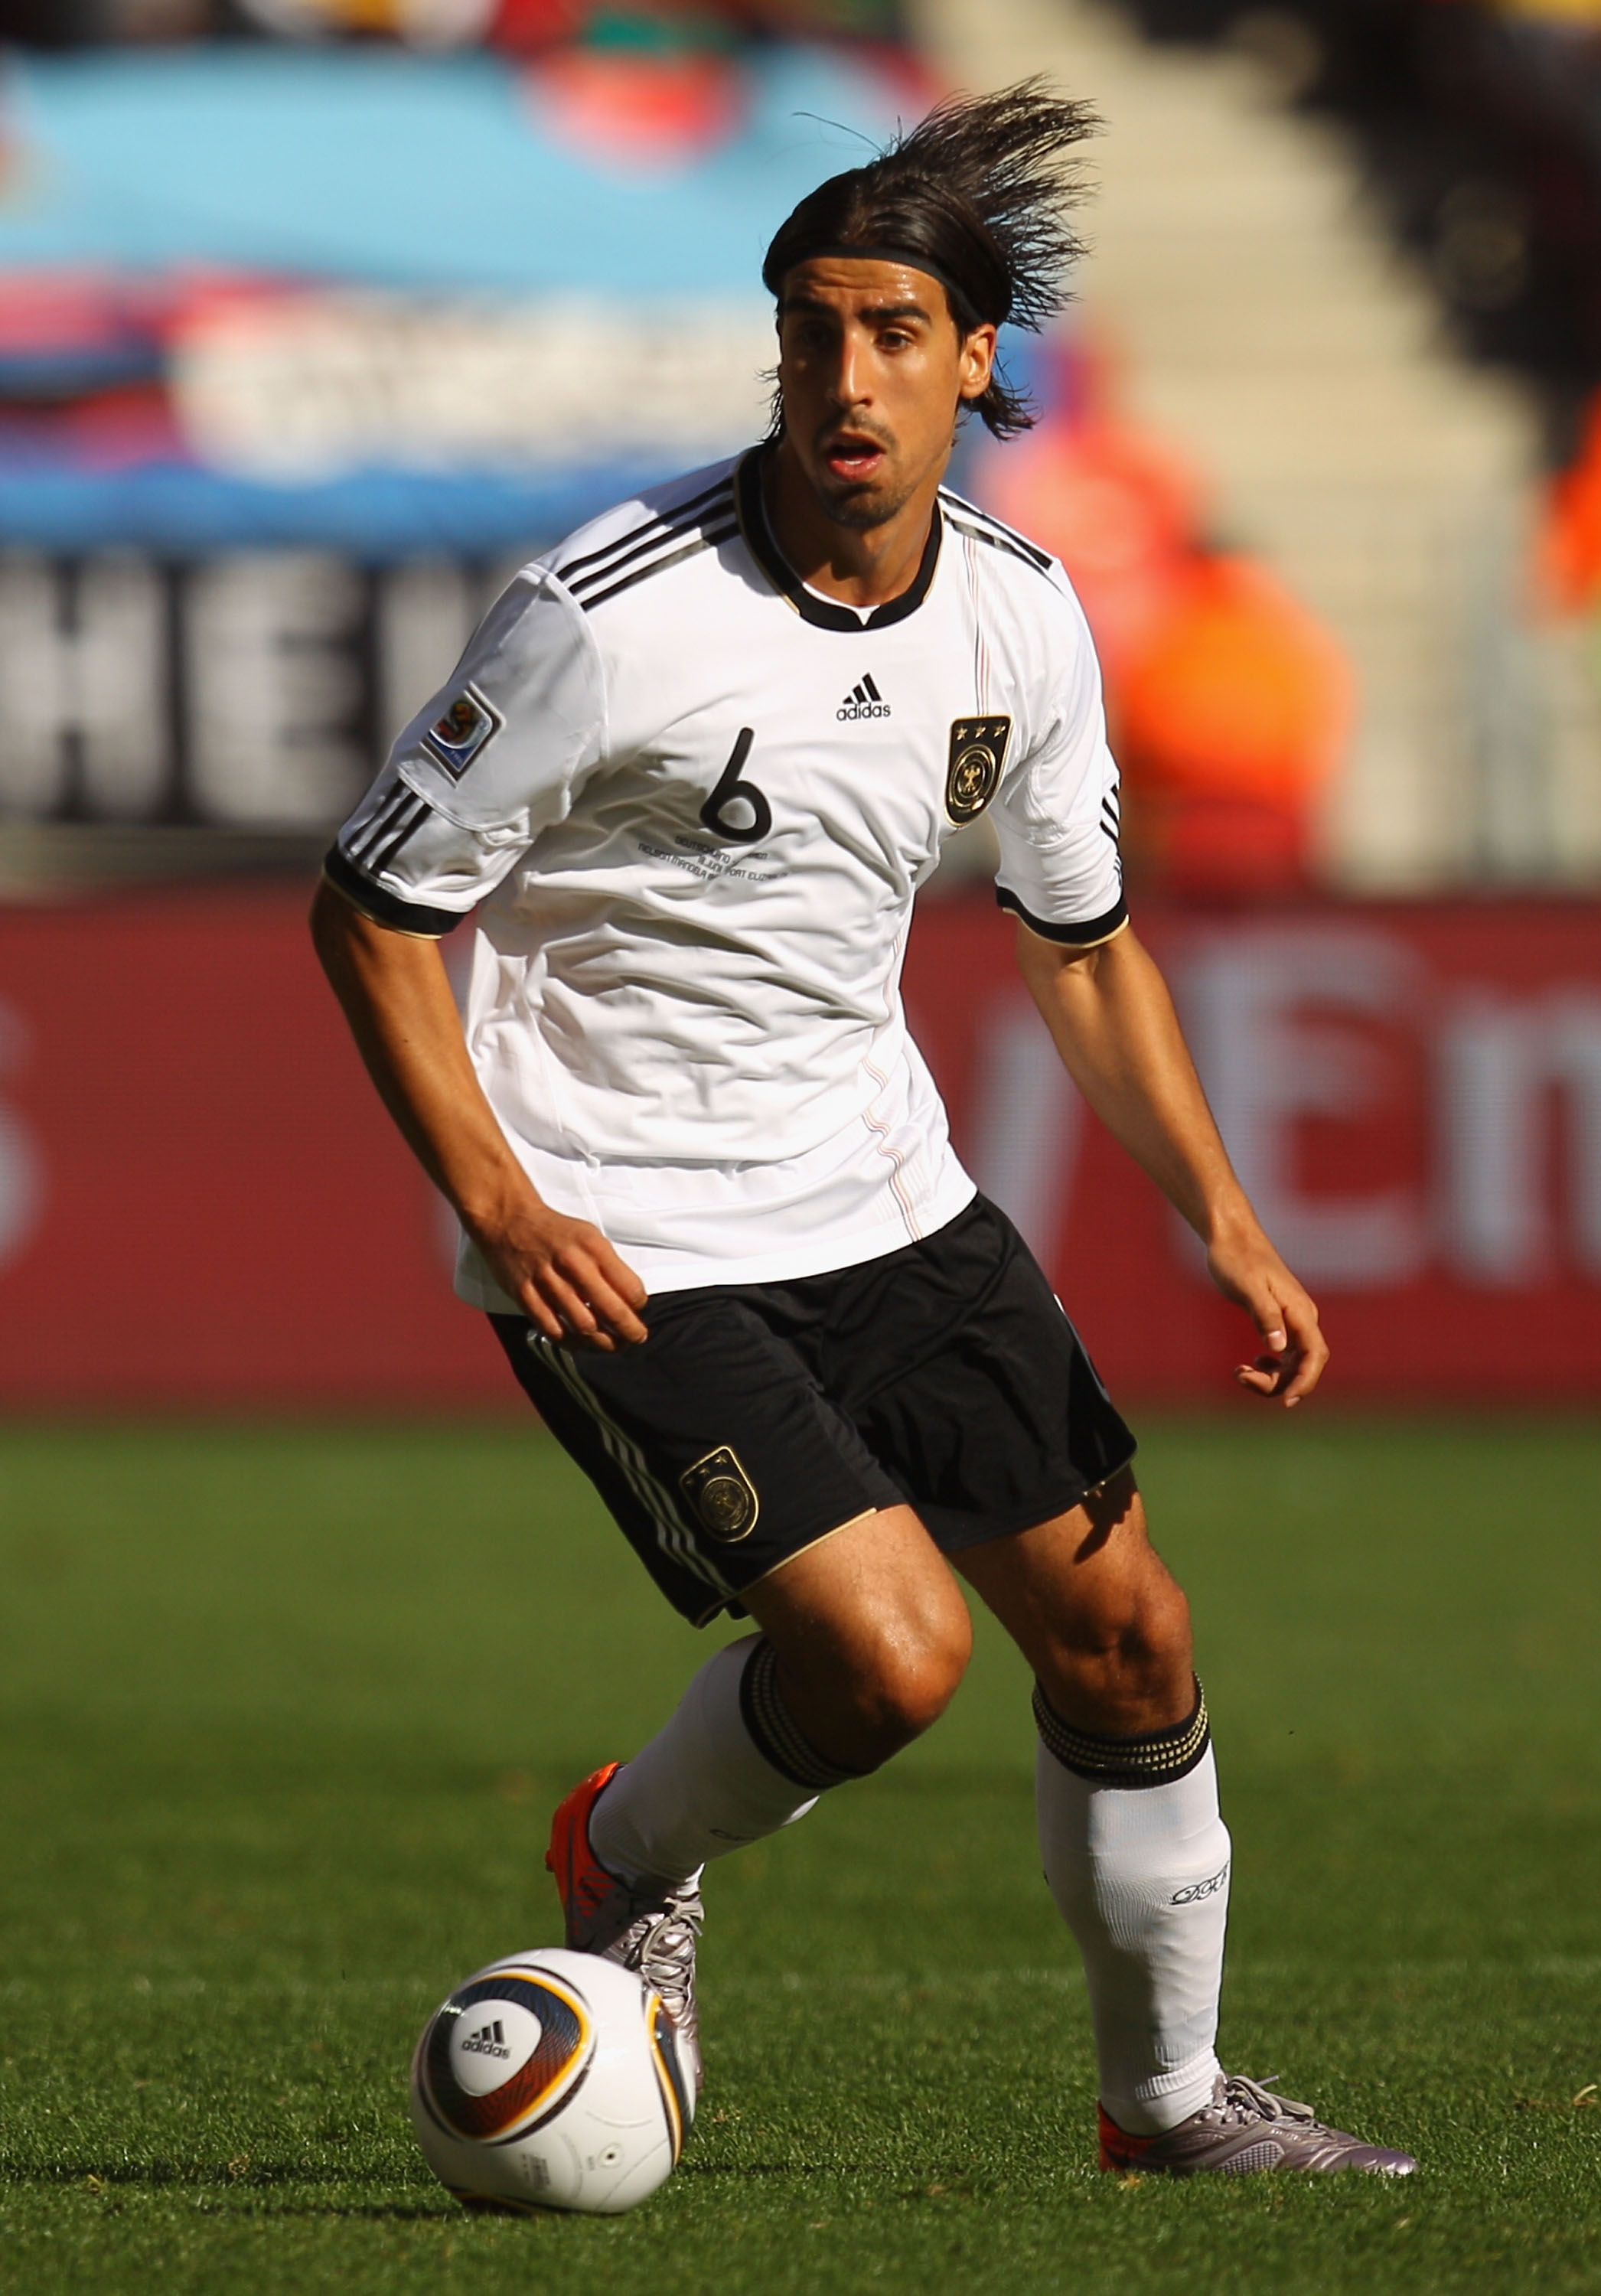 PORT ELIZABETH, SOUTH AFRICA - JUNE 18:  Sami Khedira of Germany in action during the 2010 FIFA World Cup South Africa Group D match between Germany and Serbia at Nelson Mandela Bay Stadium on June 18, 2010 in Port Elizabeth, South Africa.  (Photo by Came